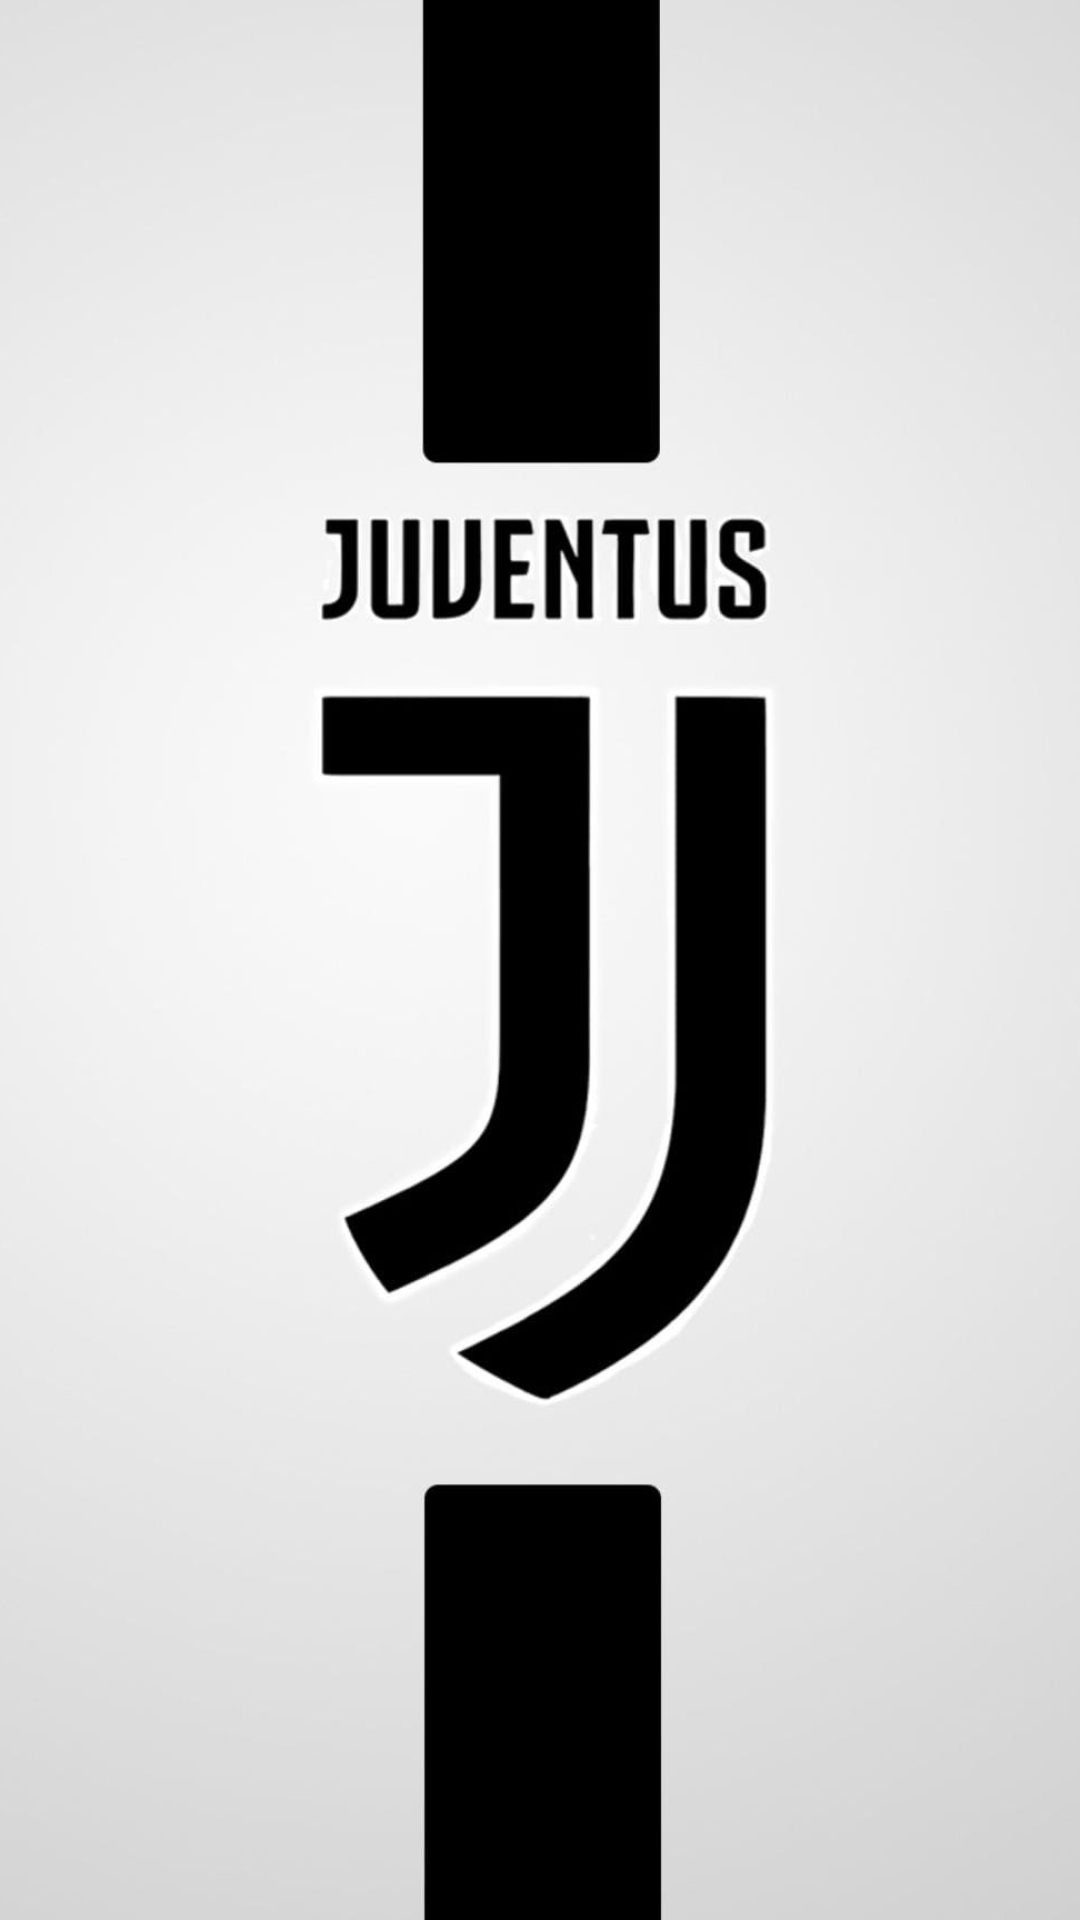 Juventus: One of the premier professional soccer clubs in the world, Black and white. 1080x1920 Full HD Background.